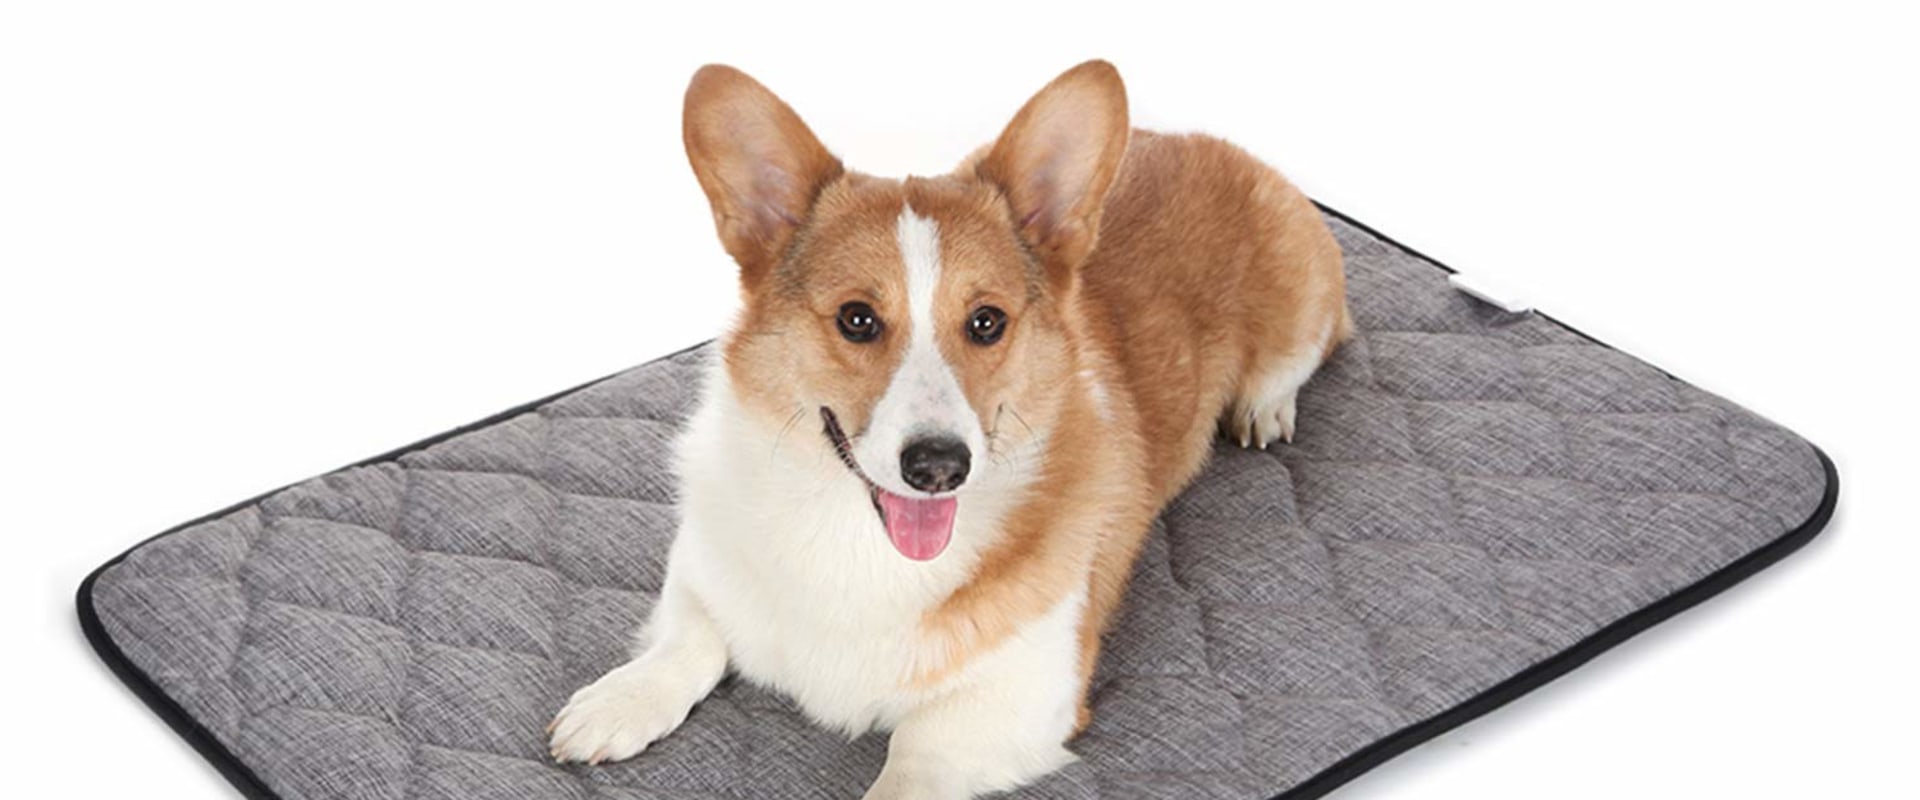 How Thick is the Padding in an Orthopedic Pet Bed?